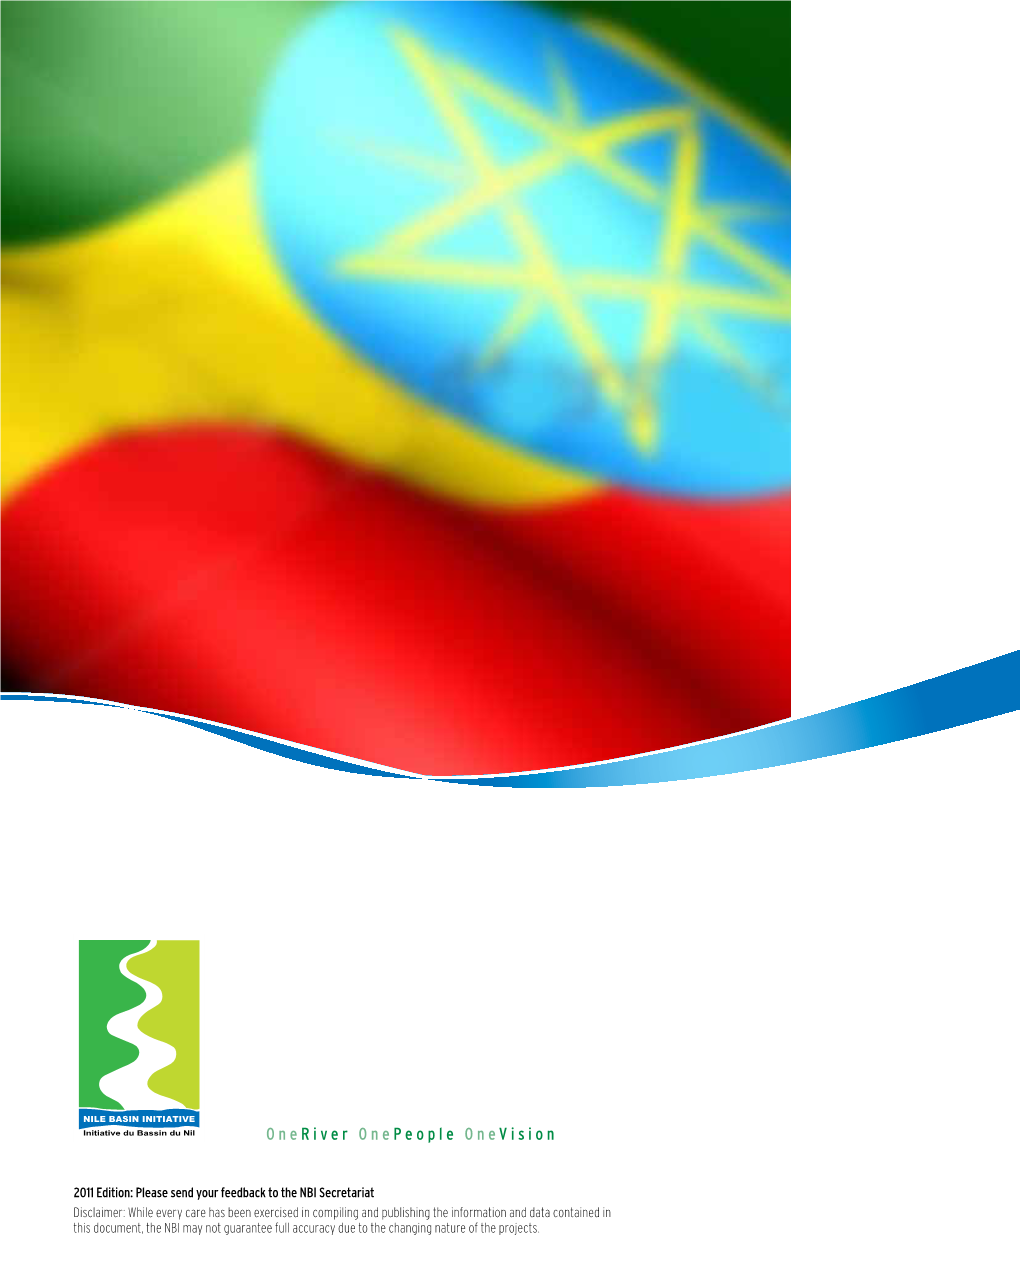 Ethiopia and the Nile Basin Initiative: Benefits of Cooperation